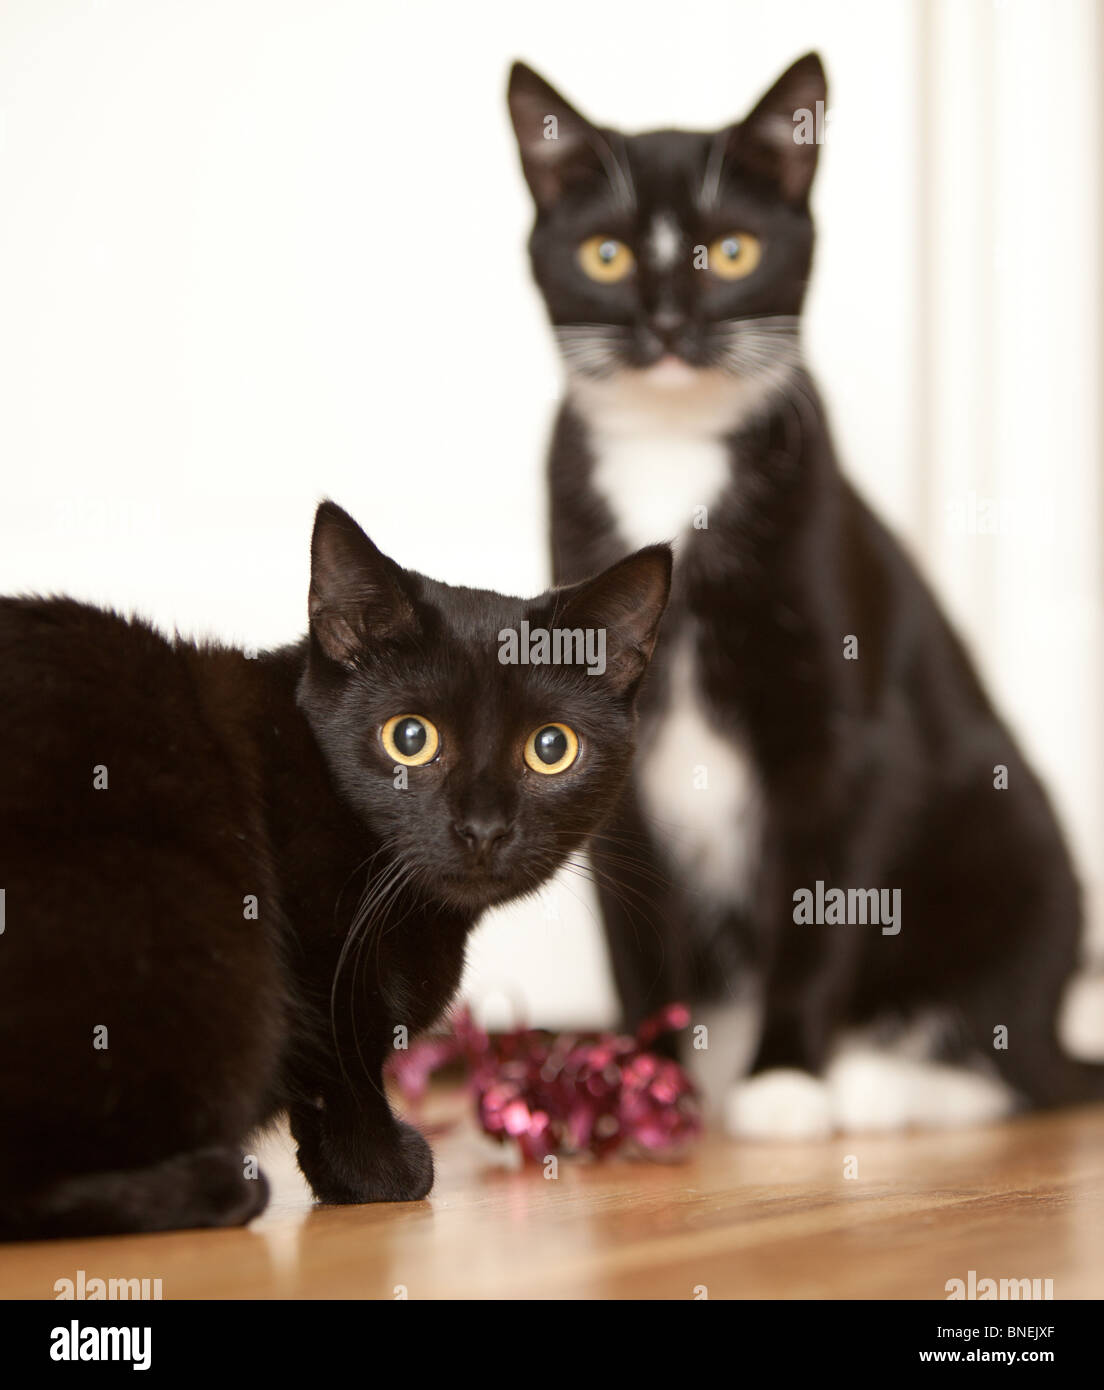 Two kittens caught playing with some gift wrapping ribbon. Stock Photo